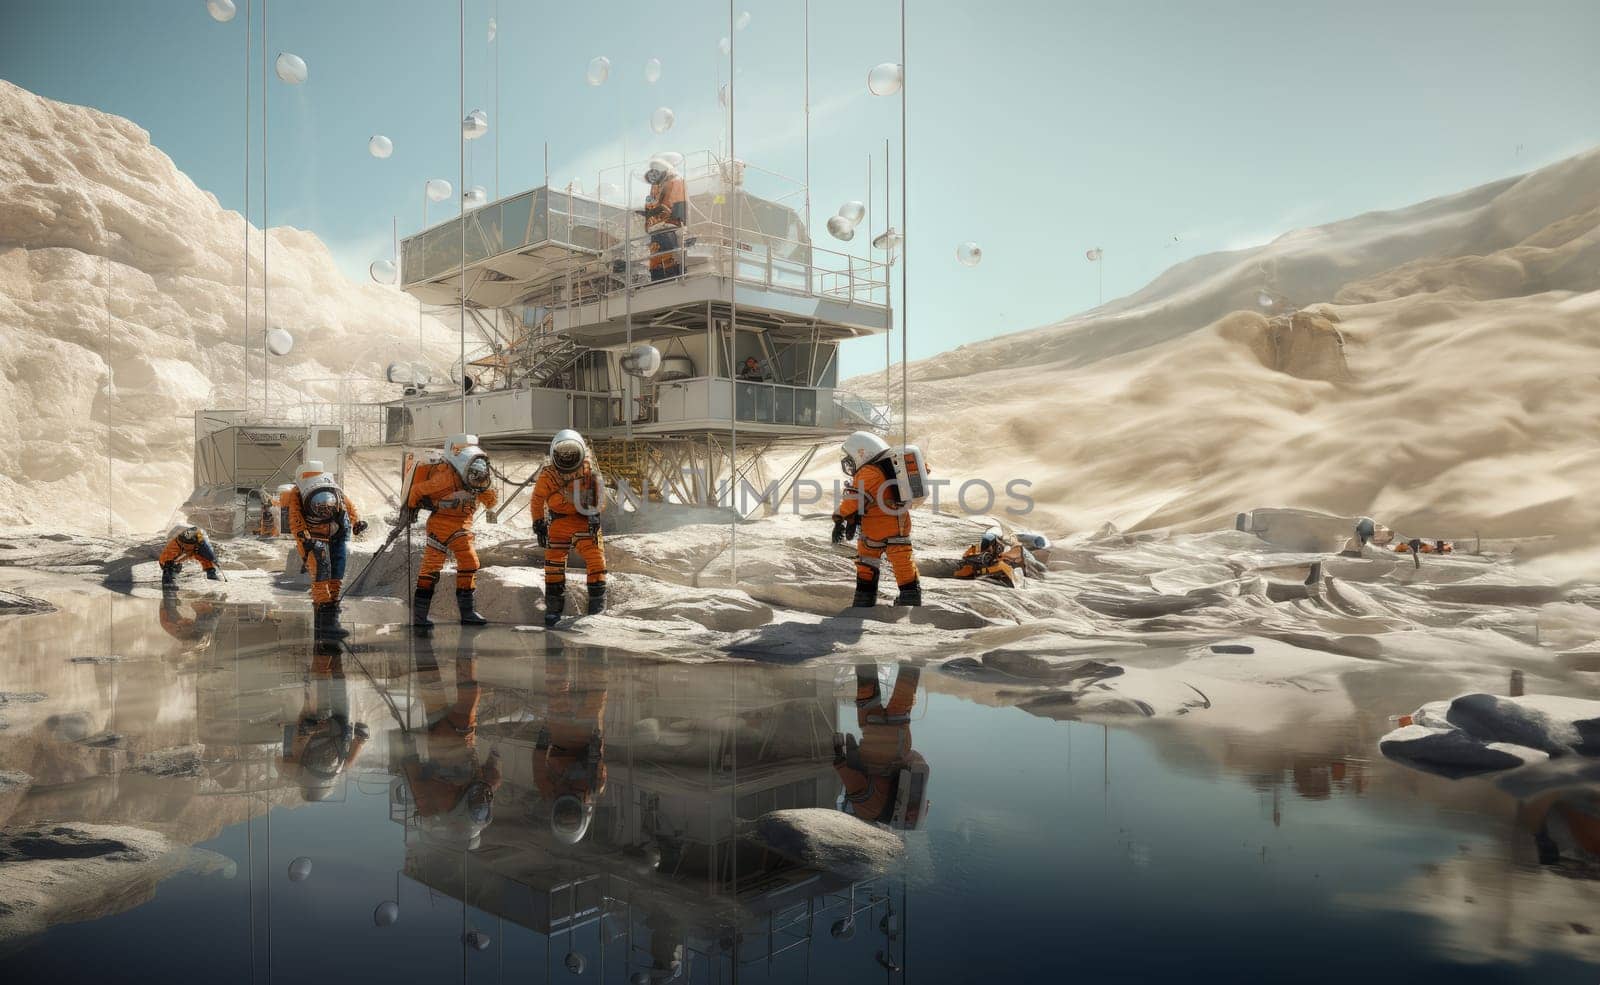 In a historic endeavor, a team of specialized astronauts works diligently on constructing a space station on the surface of Mars, pushing the boundaries of human exploration and scientific achievement by dotshock